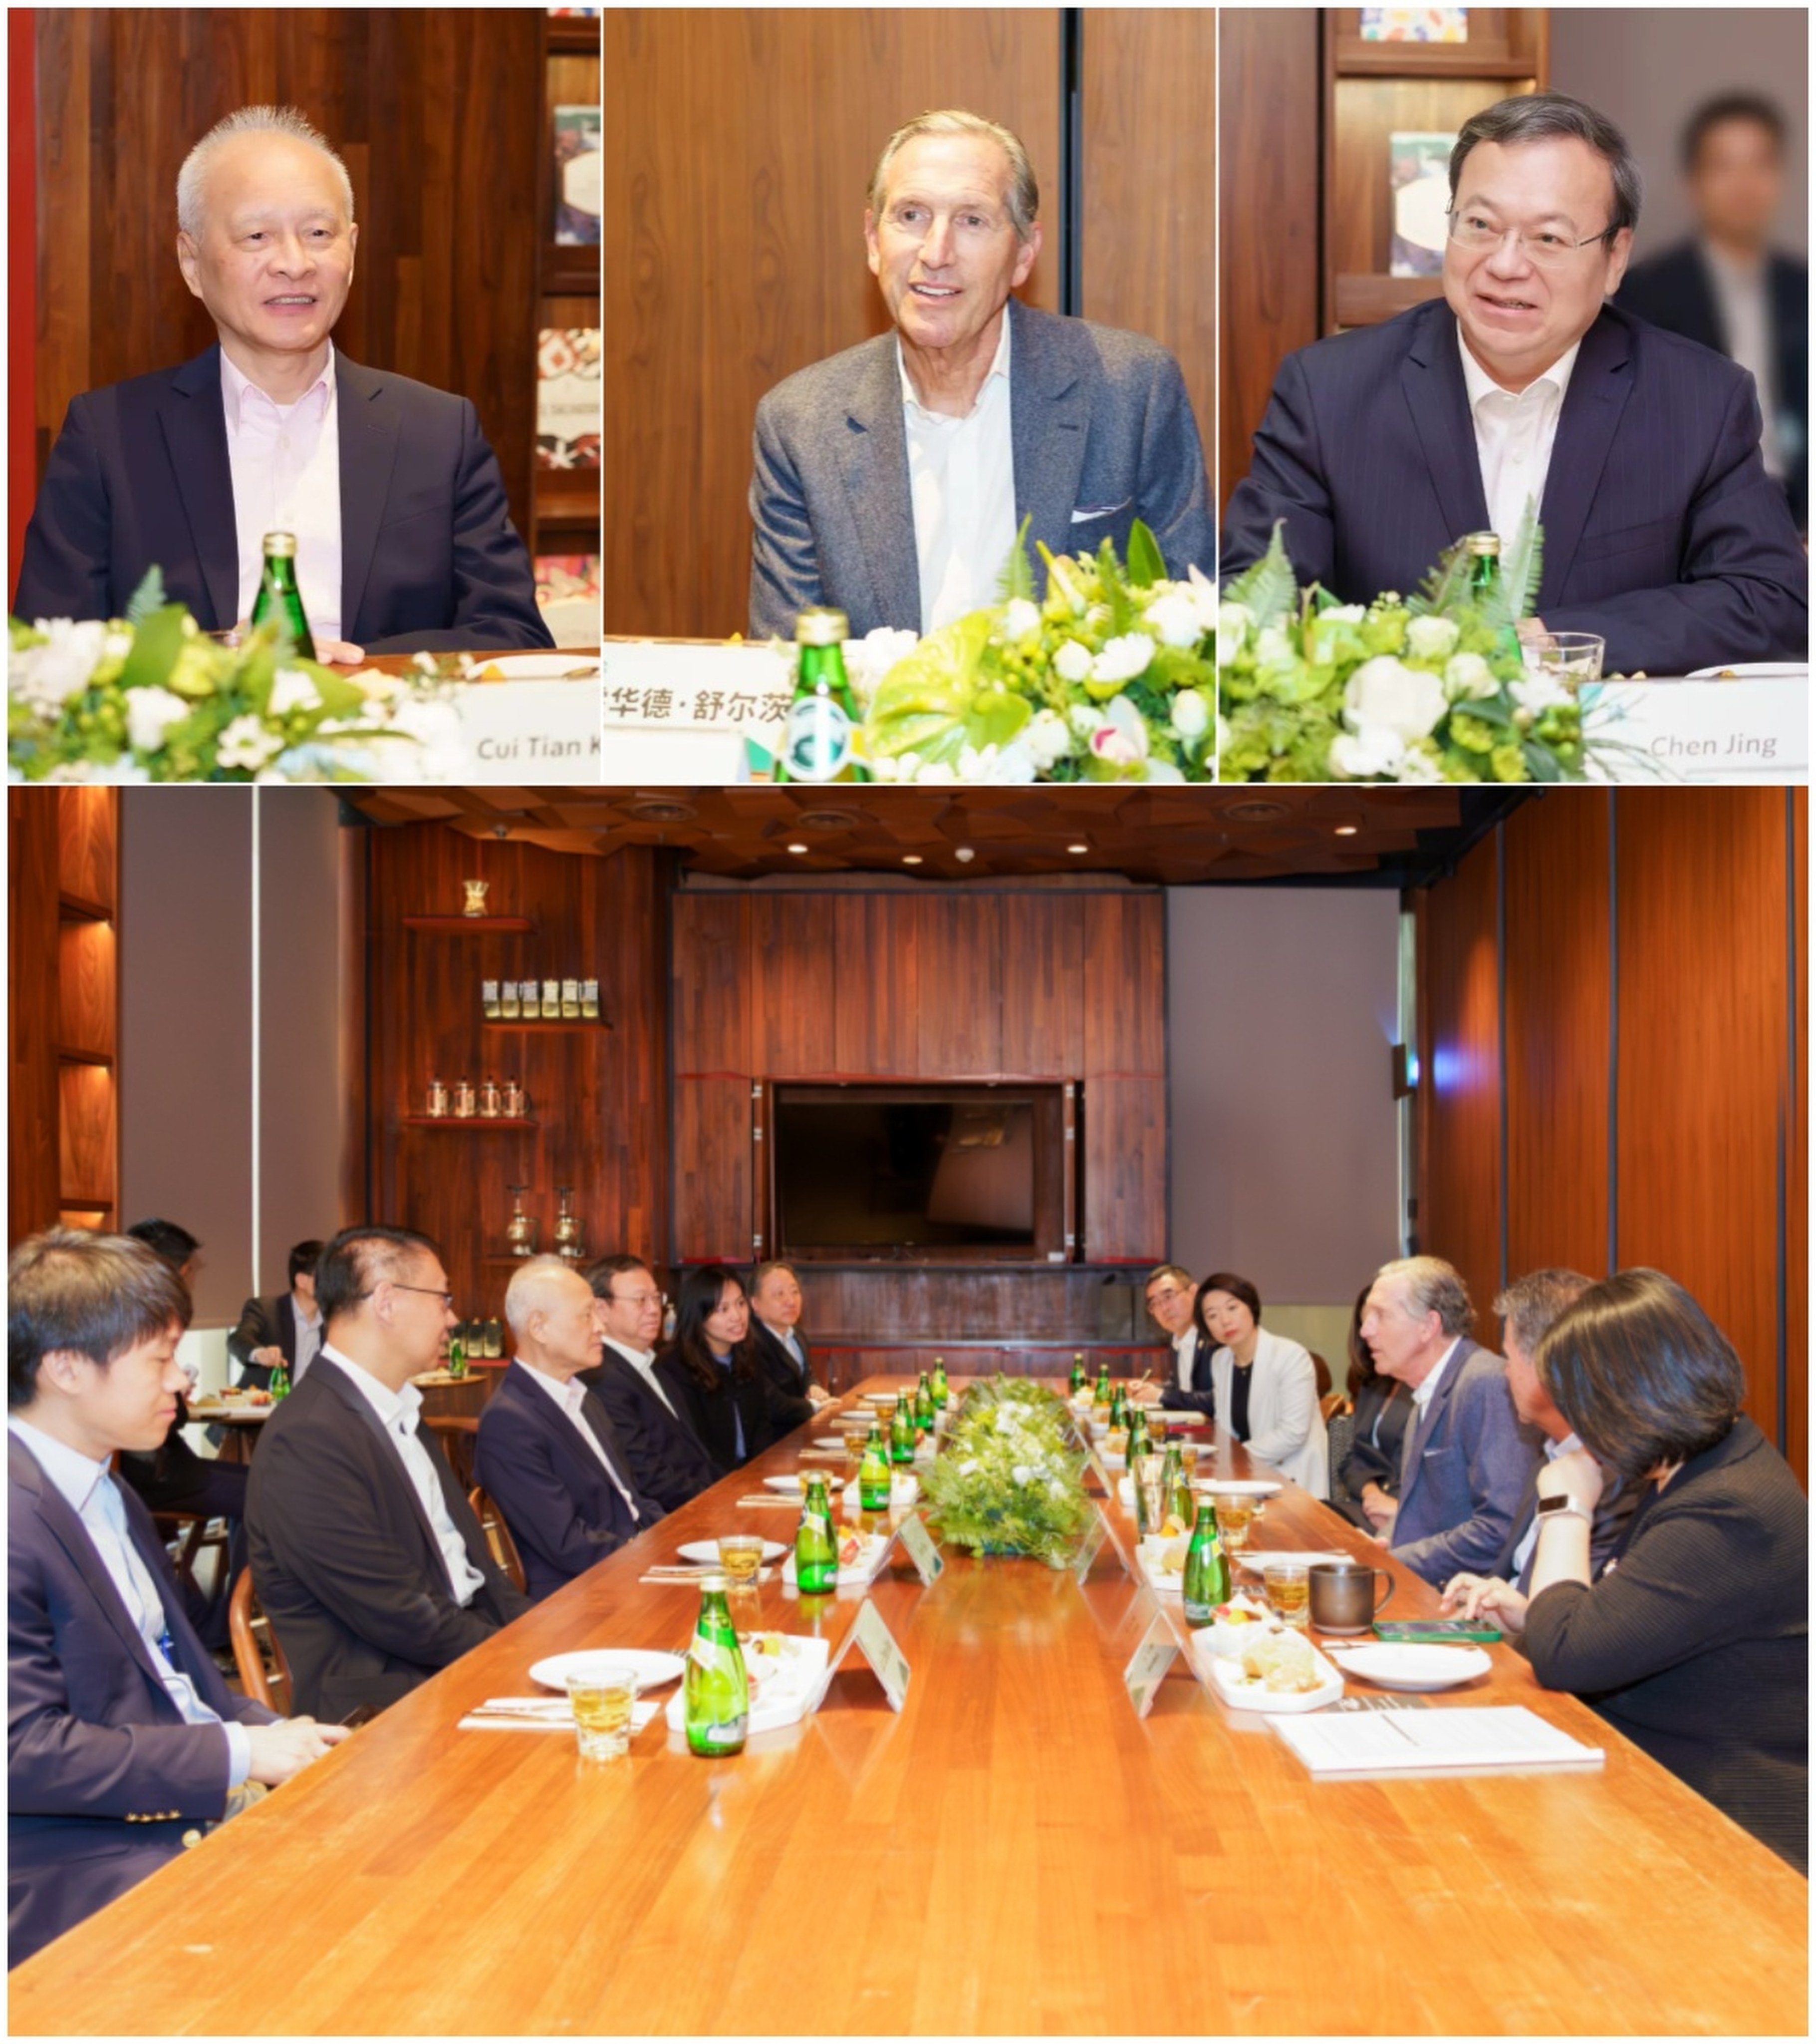 Cui Tiankai, former Chinese ambassador to the US, meets former Starbucks CEO Howard Schultz in Shanghai on Friday. Photo: Twitter/ ShanghaiEye